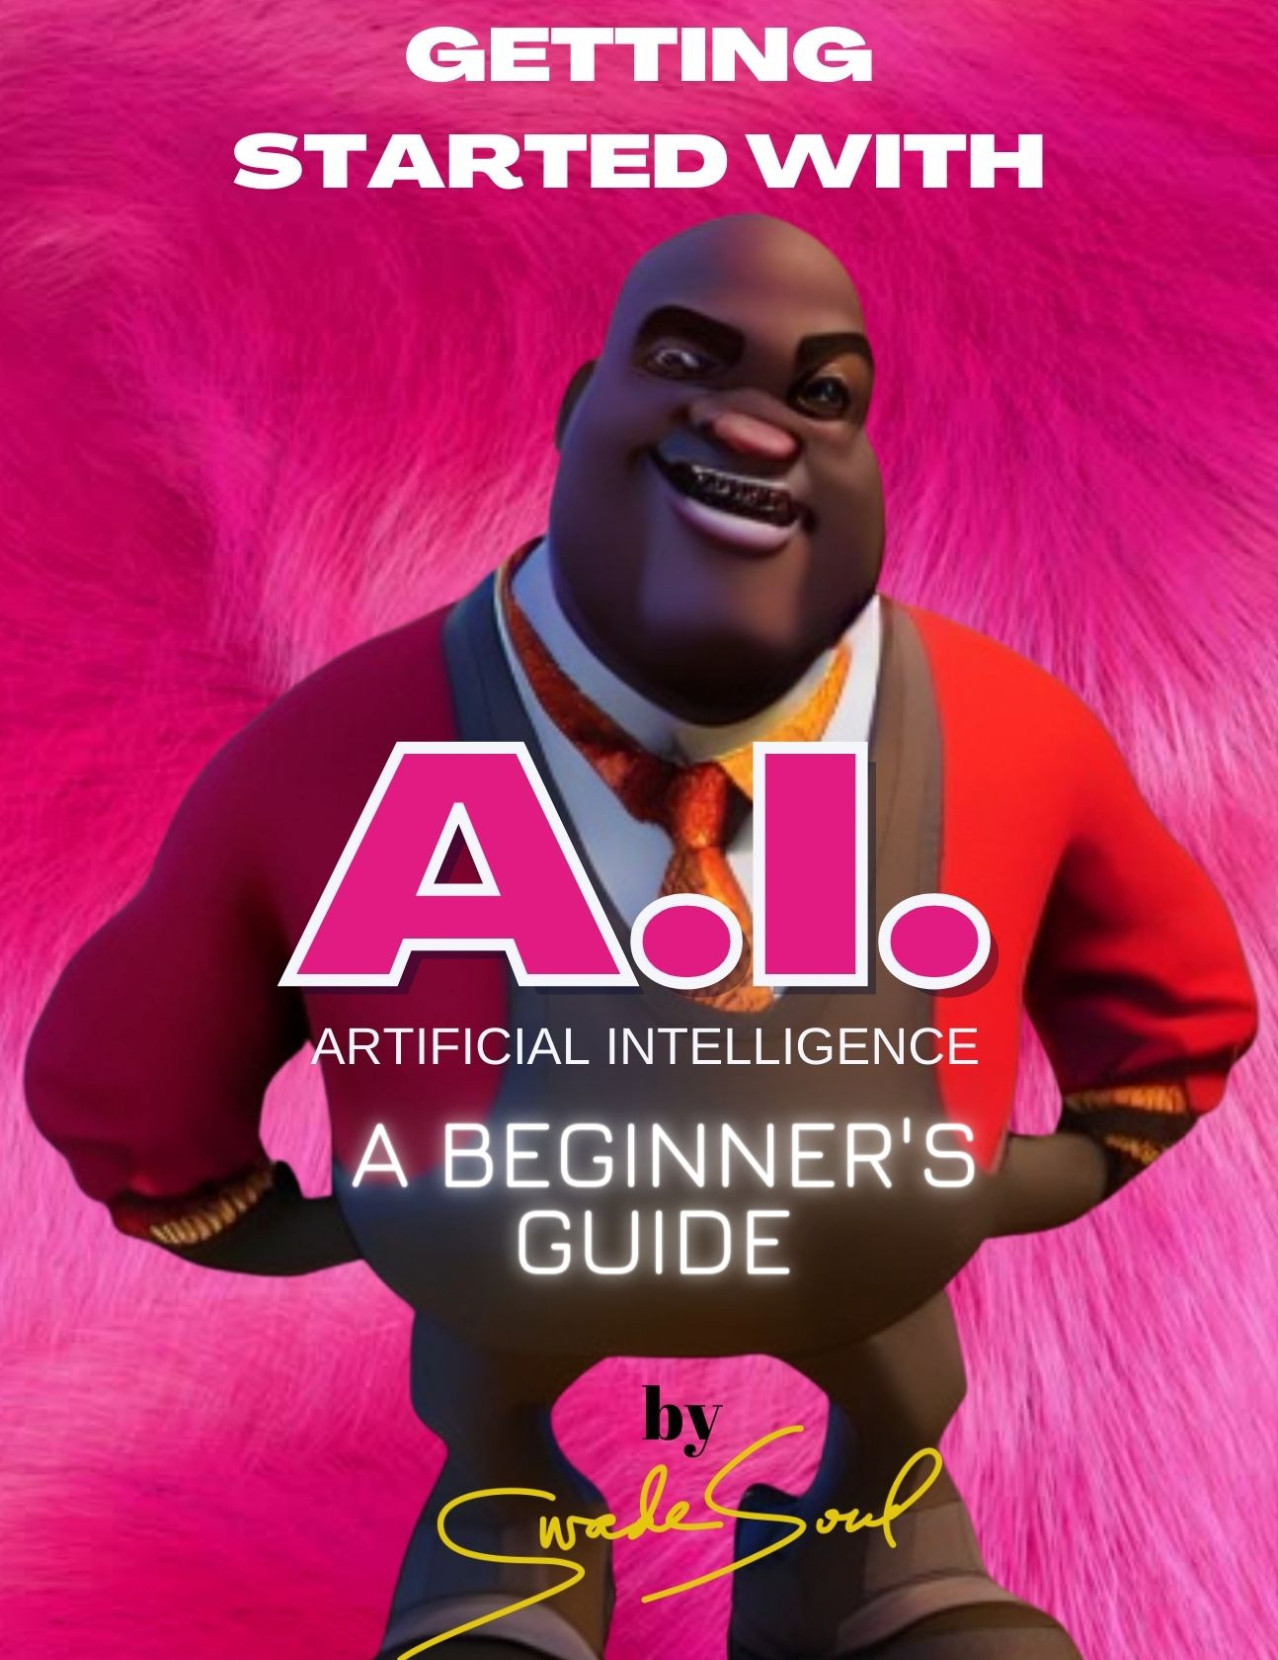 getting started with a.i. artificial intelligence a beginner 's guide